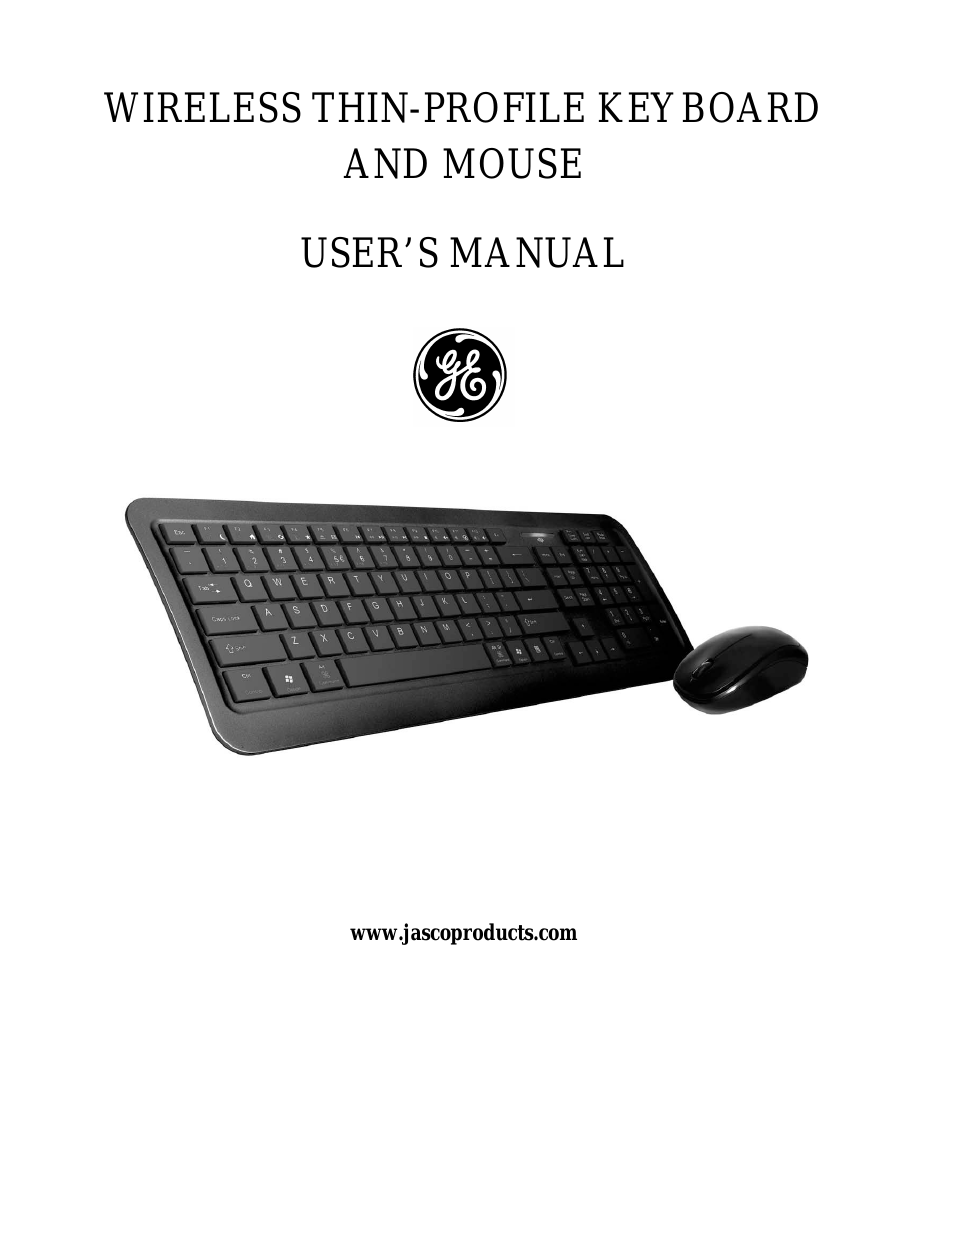 98614 GE Wireless Thin-Profile Keyboard and Mouse